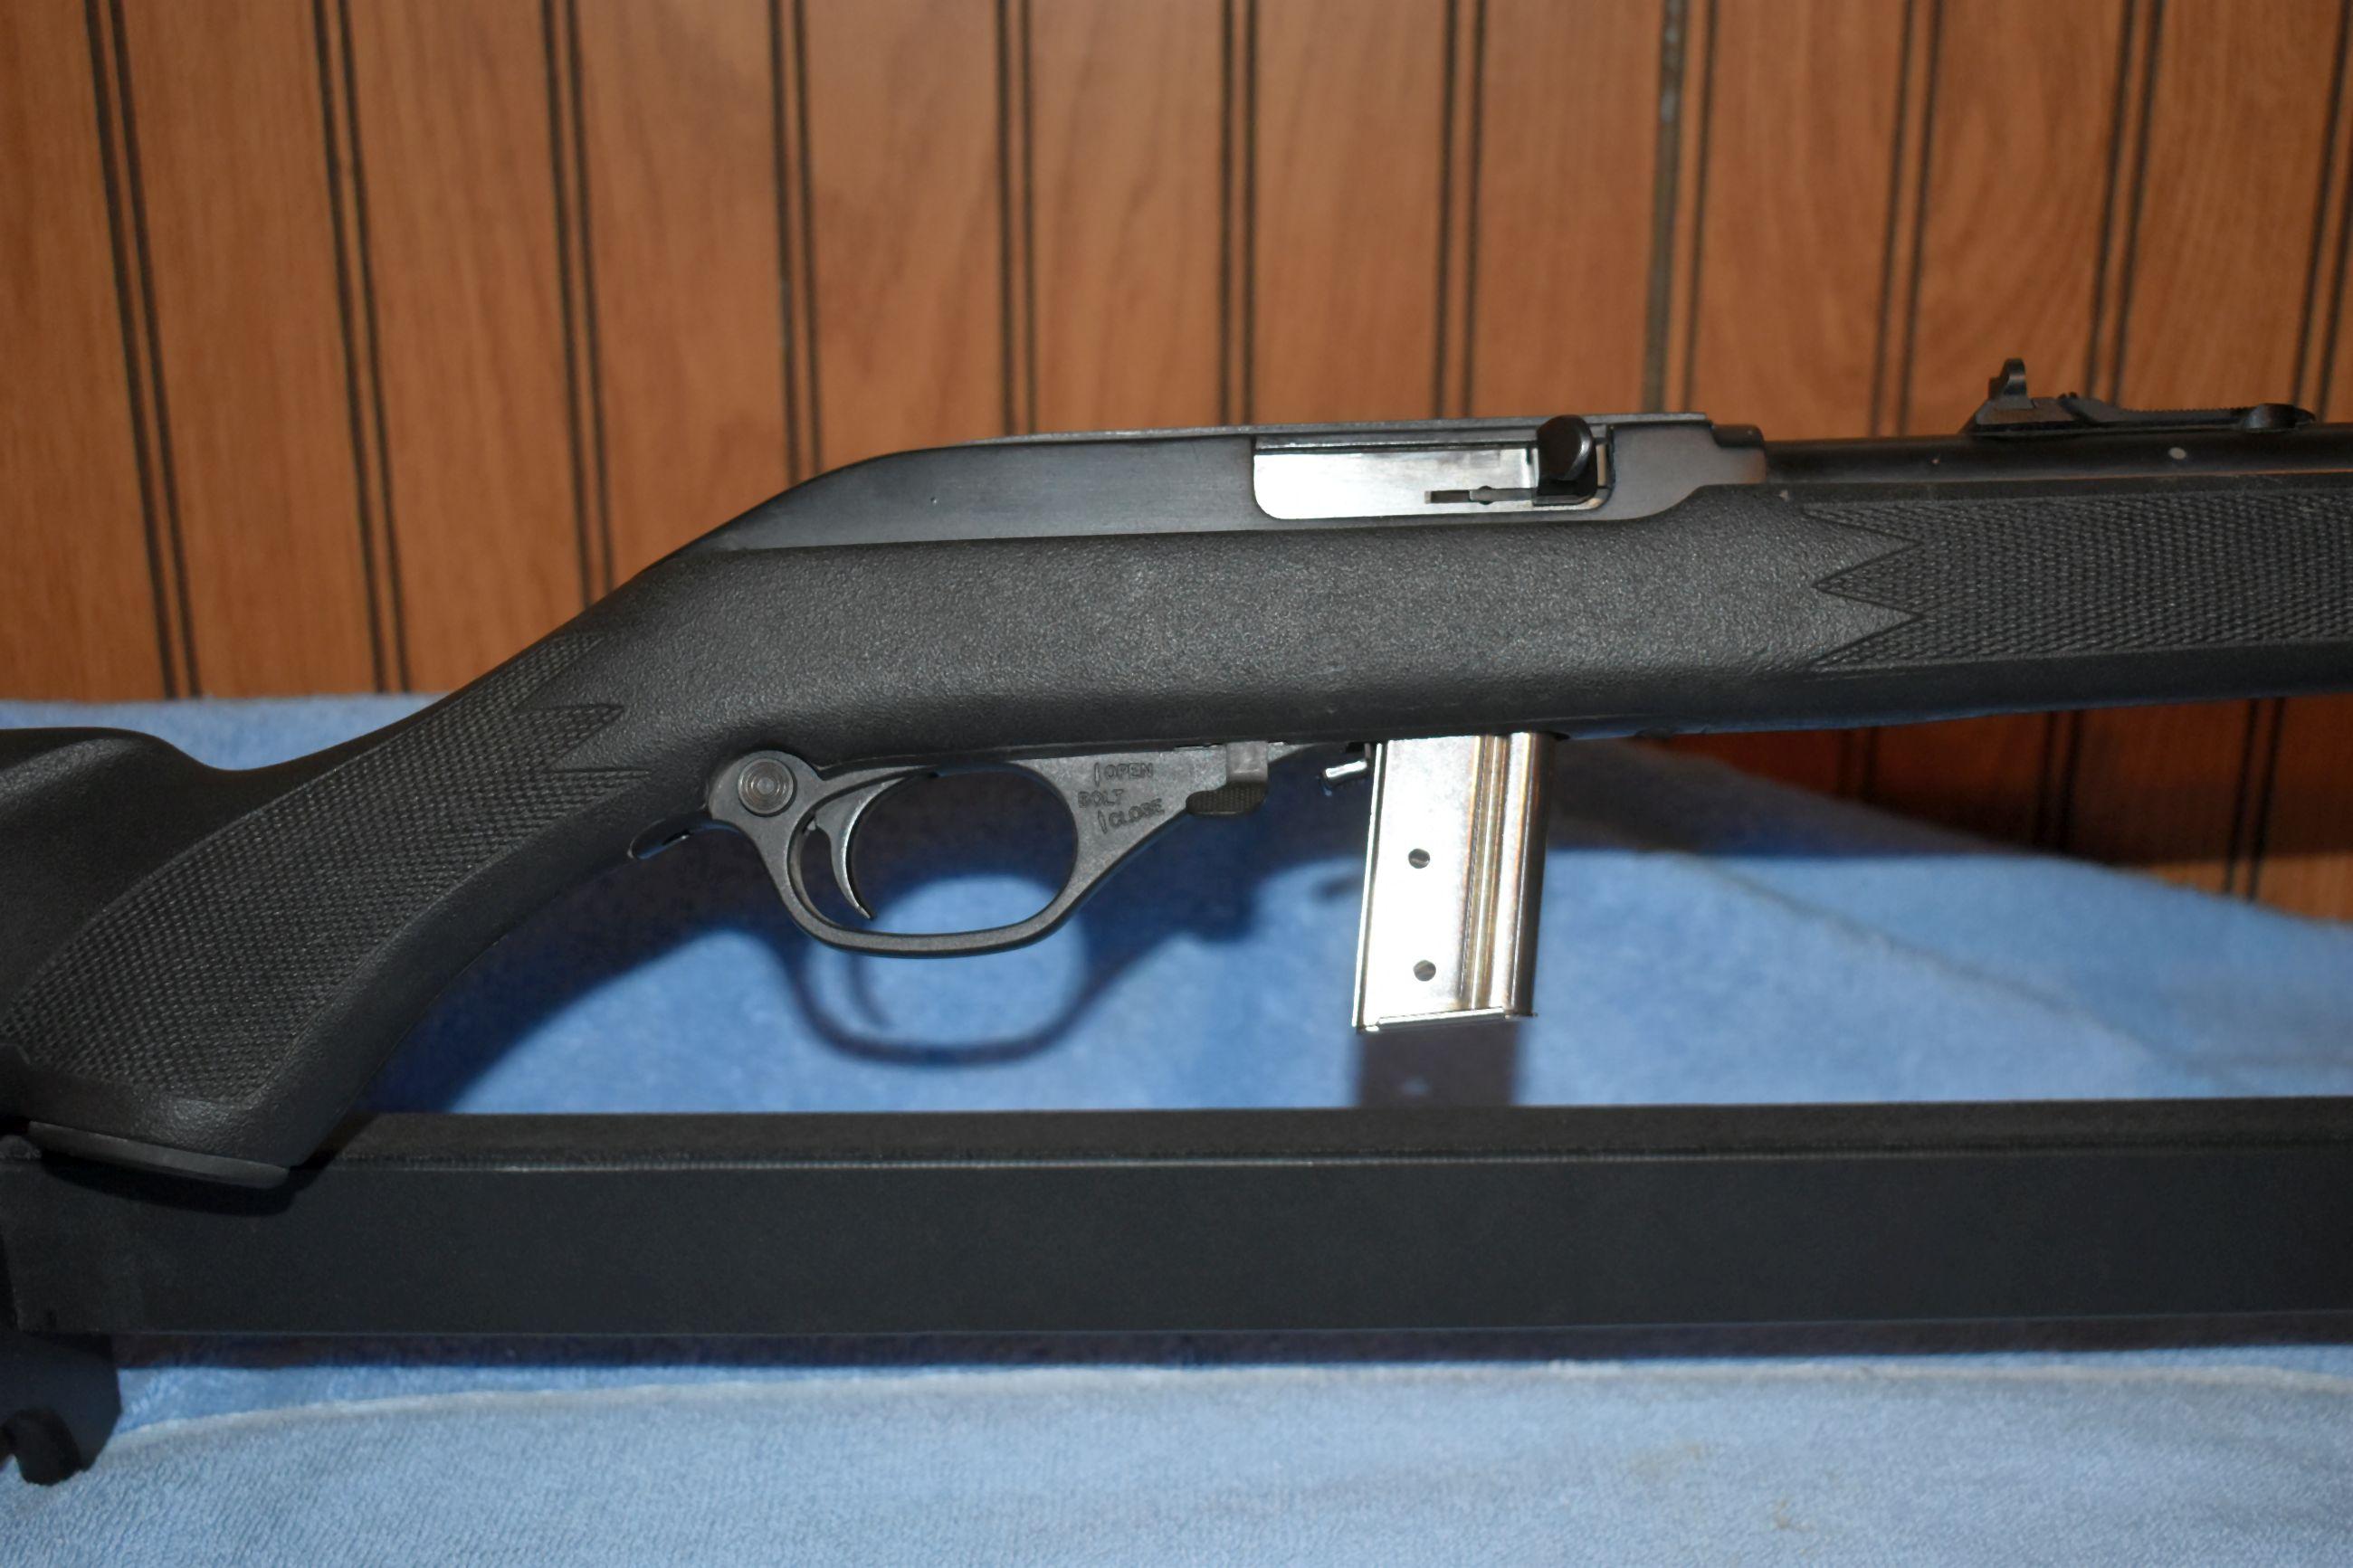 Marlin Model 795, .22 LR Only, Micro Grooved Barrel, Semi Automatic, Magazine, SN:01144600